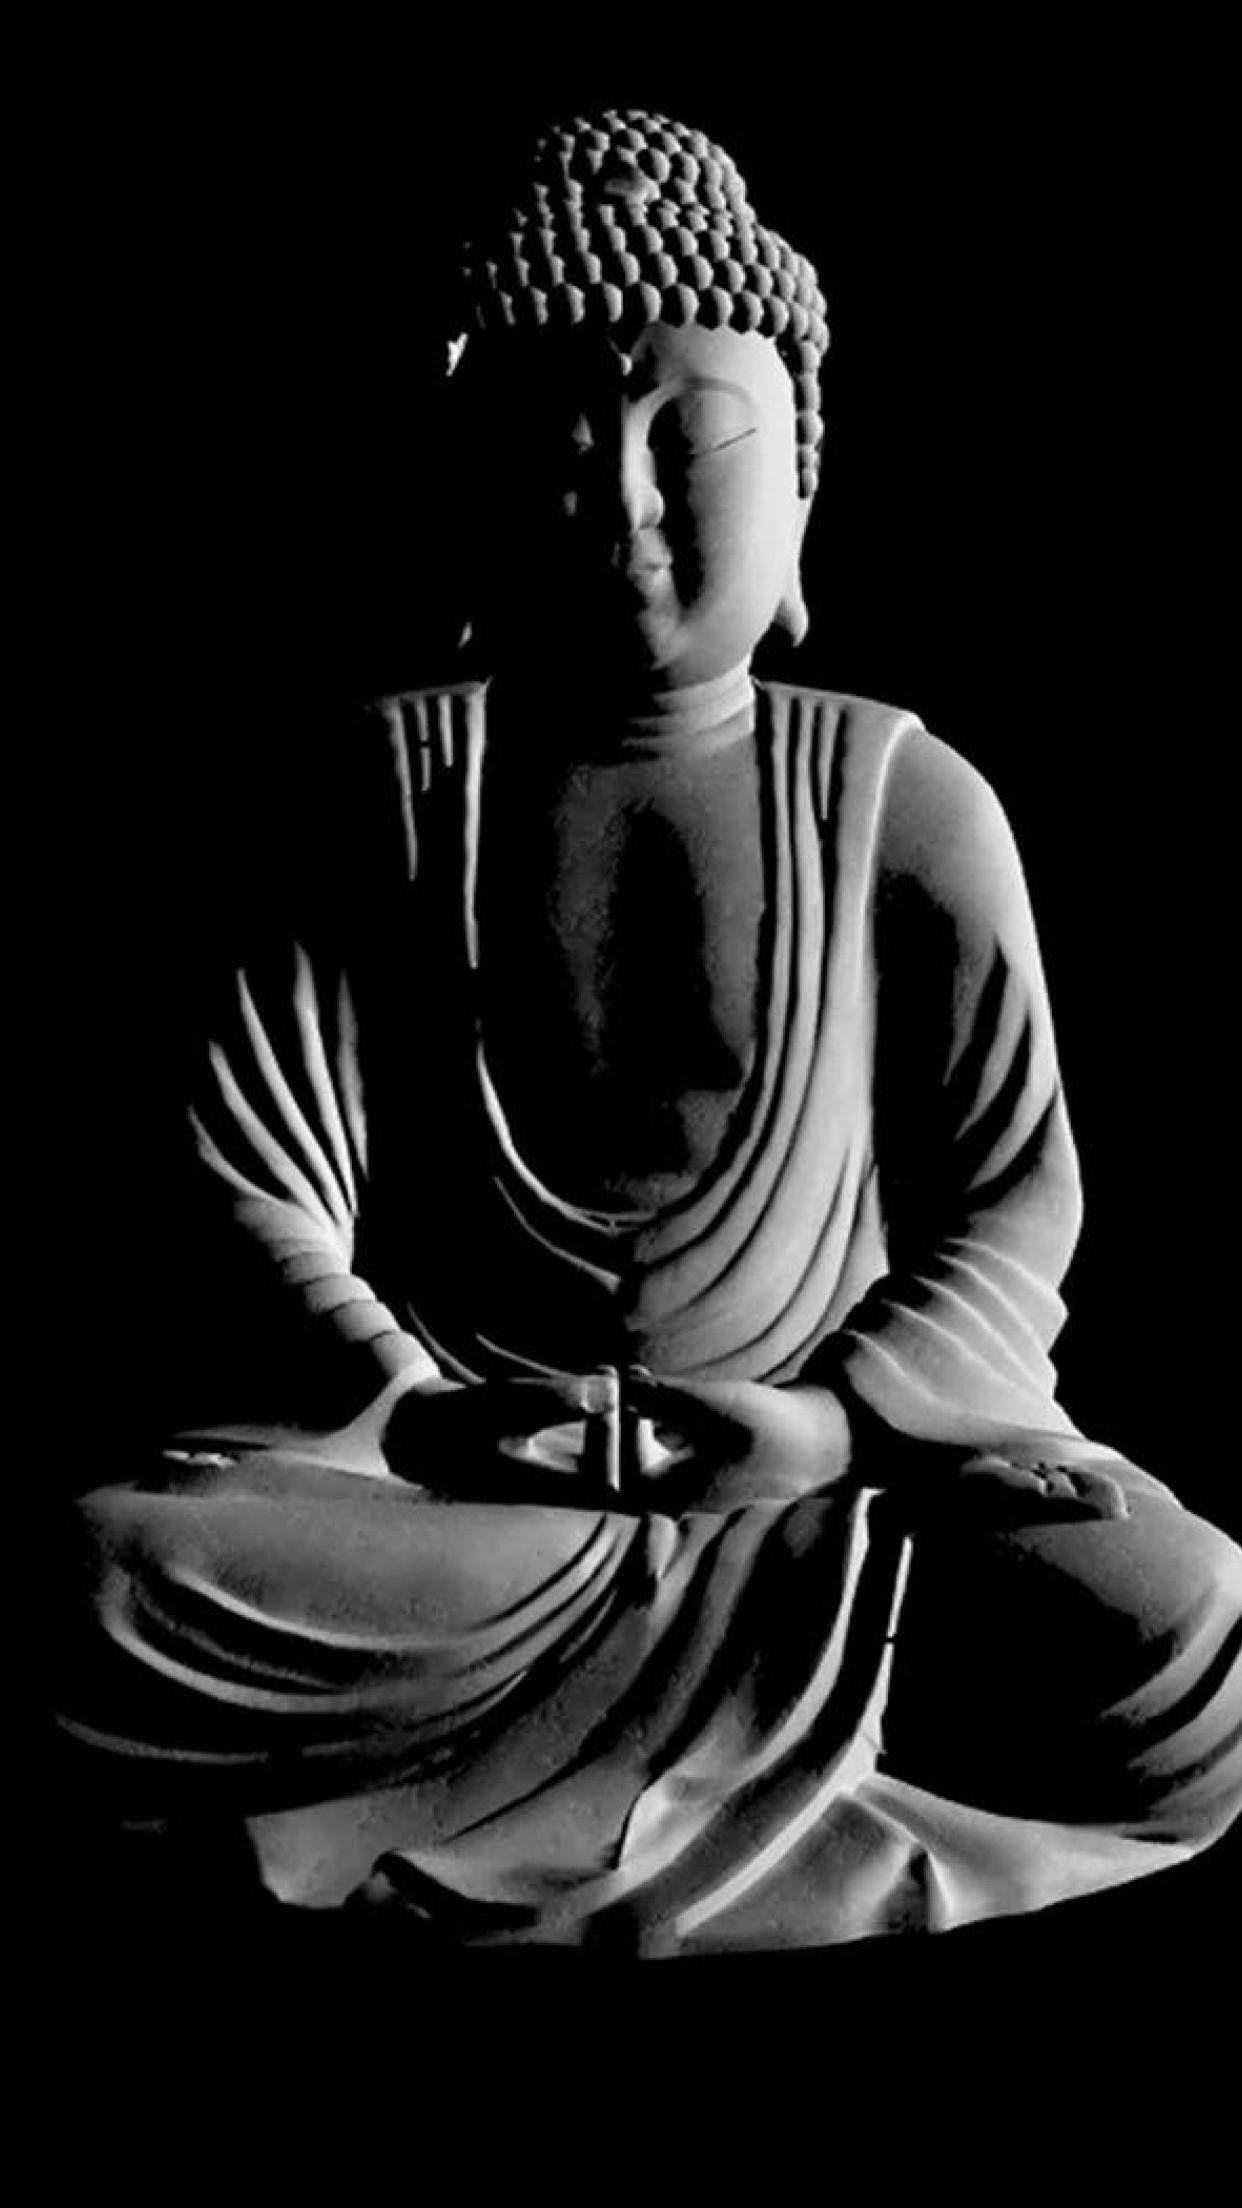 Buddha IPhone Wallpaper 57 images